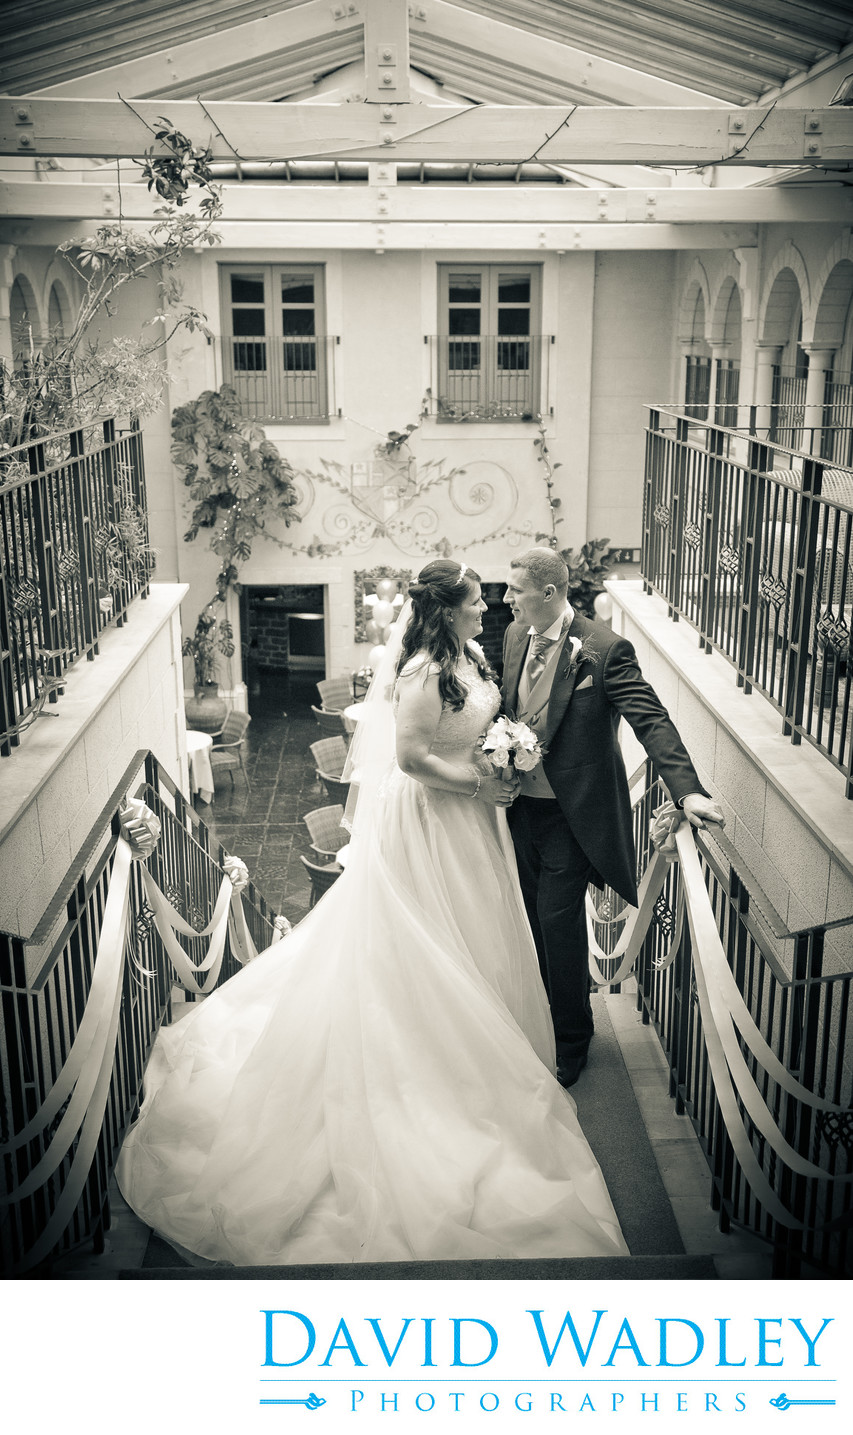 Top of the stairs at Nailcote Hall Wedding.